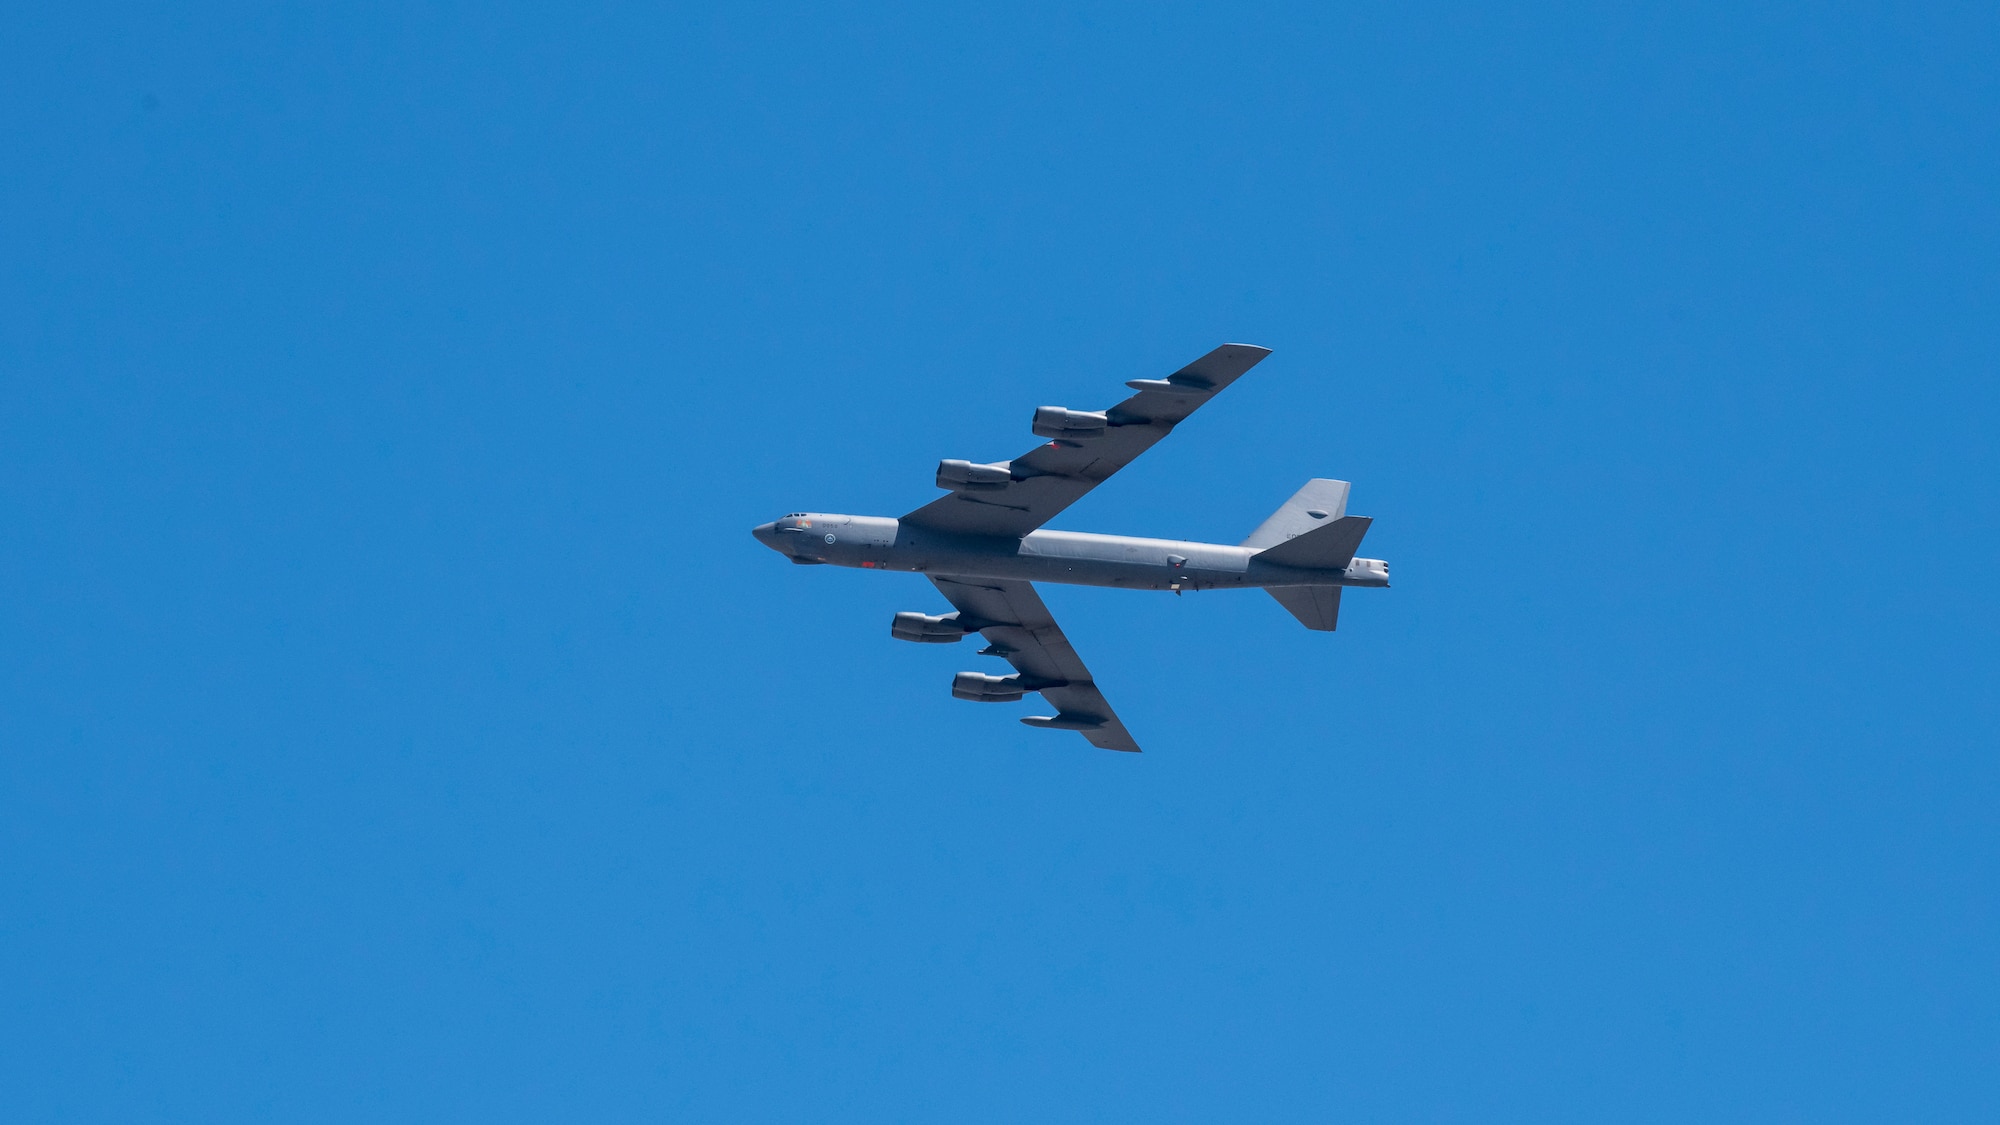 A B52 Stratofortress from the 412th Test Wing out of Edwards Air Force Base, California, flies over the Antelope Valley communities of Lancaster and Palmdale in northern Los Angeles County, May 14. The flyover is in honor of, and to show gratitude to the front-line health care workers helping fight the COVID-19 pandemic in the Antelope Valley, also referred to as the Aerospace Valley. (Air Force photo by Giancarlo Casem)